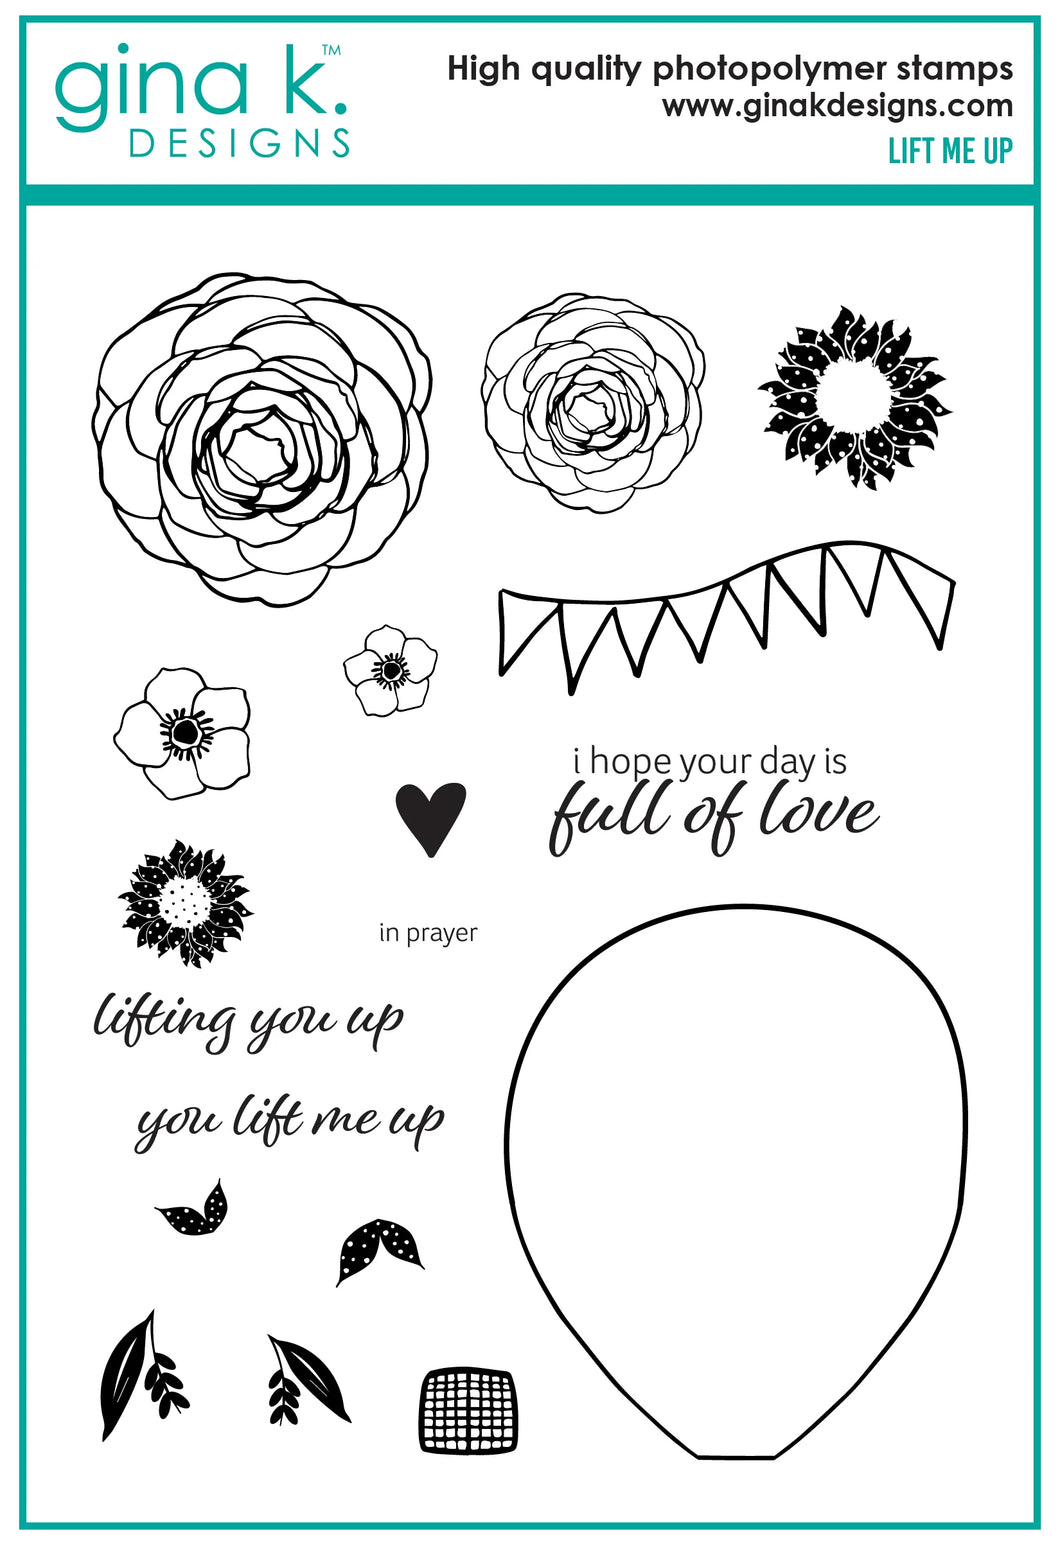 Gina K. Designs - Stamp & Die Set - Lift Me Up. Lift Me Up is a set by Lisa Hetrick. This set is made of premium clear photopolymer and measures 6